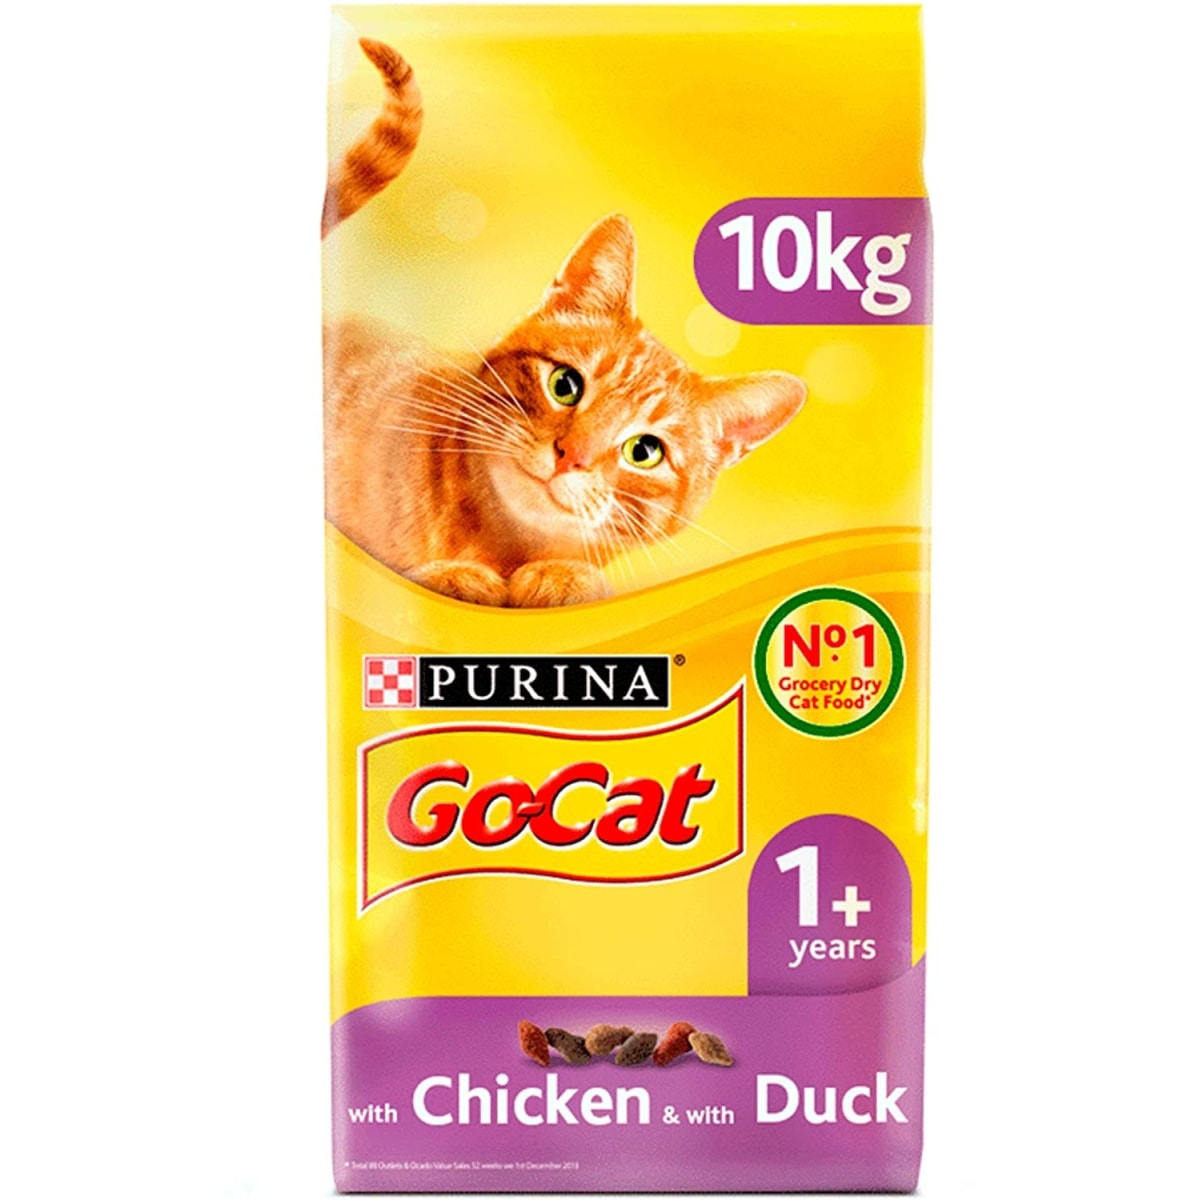 Go-Cat Chicken and Duck 10kg Main Image